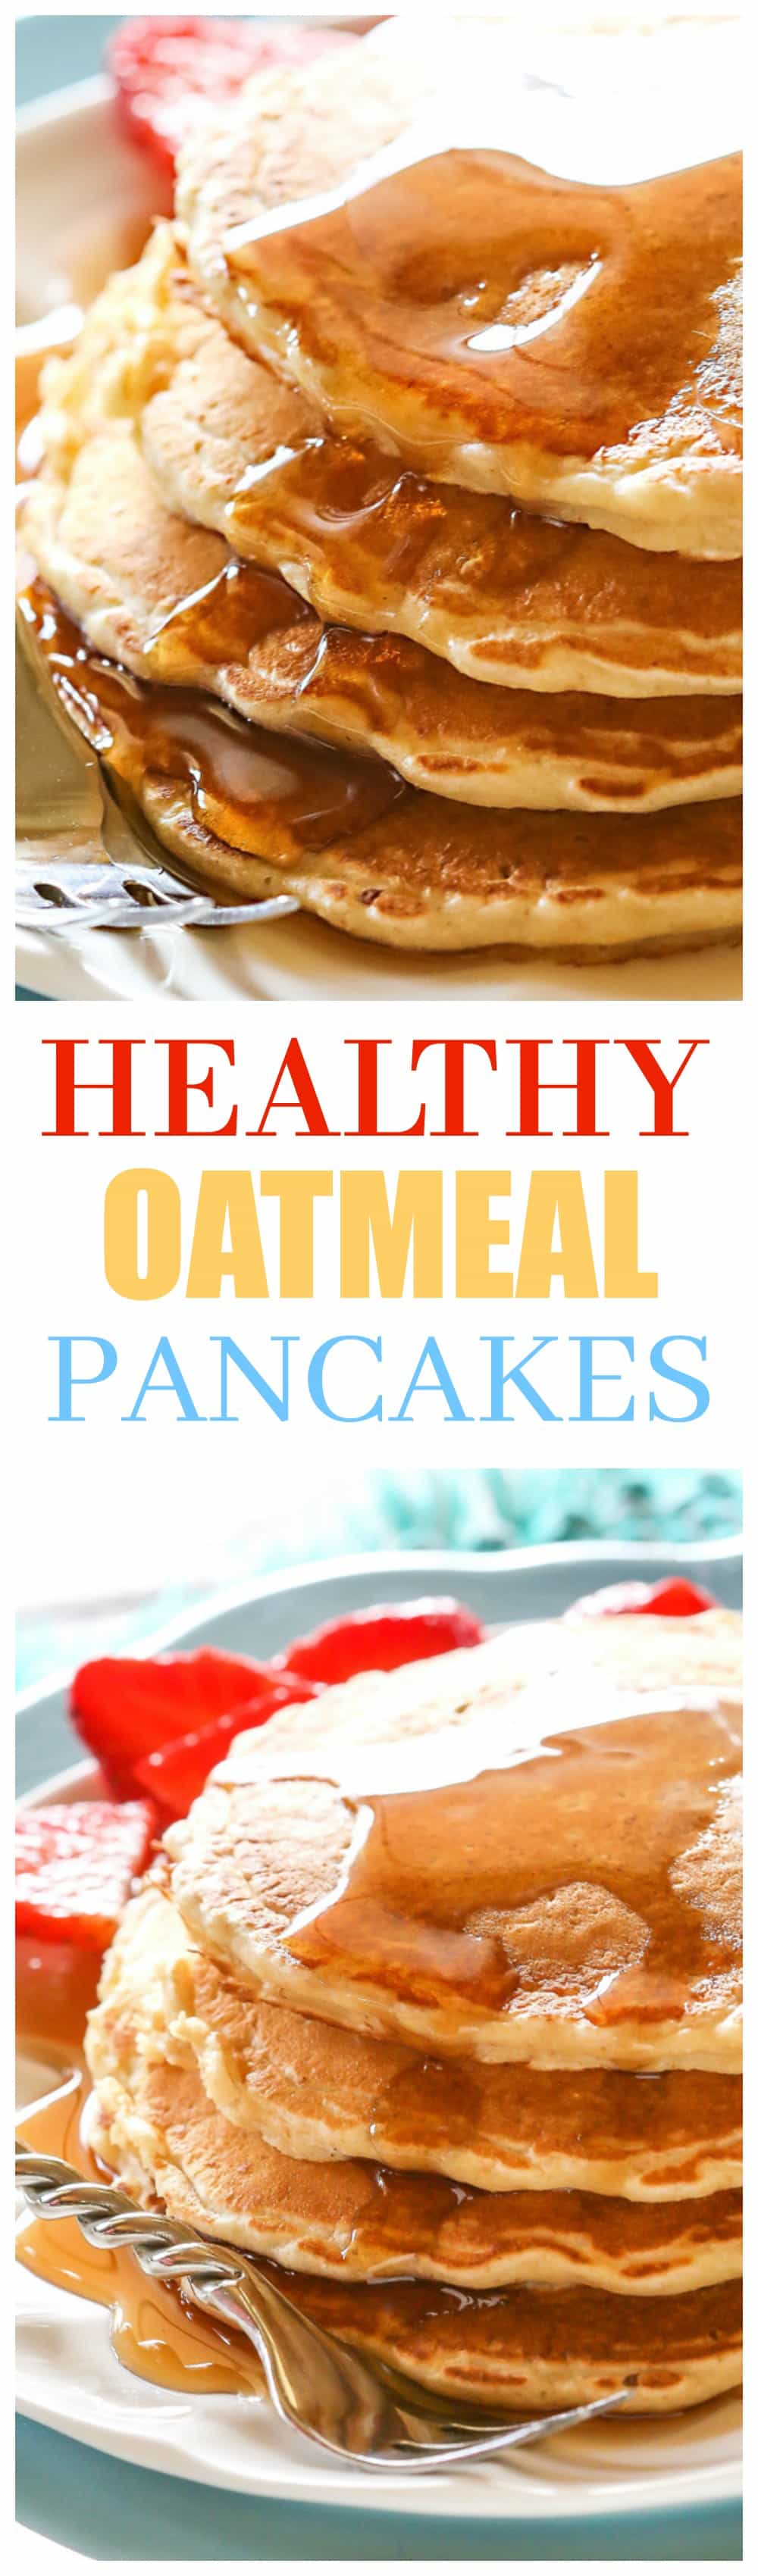 Healthy Oatmeal Pancakes - a hearty pancake recipe with blended oats in the batter. #healthy #pancakes #oatmeal #breakfast #recipe